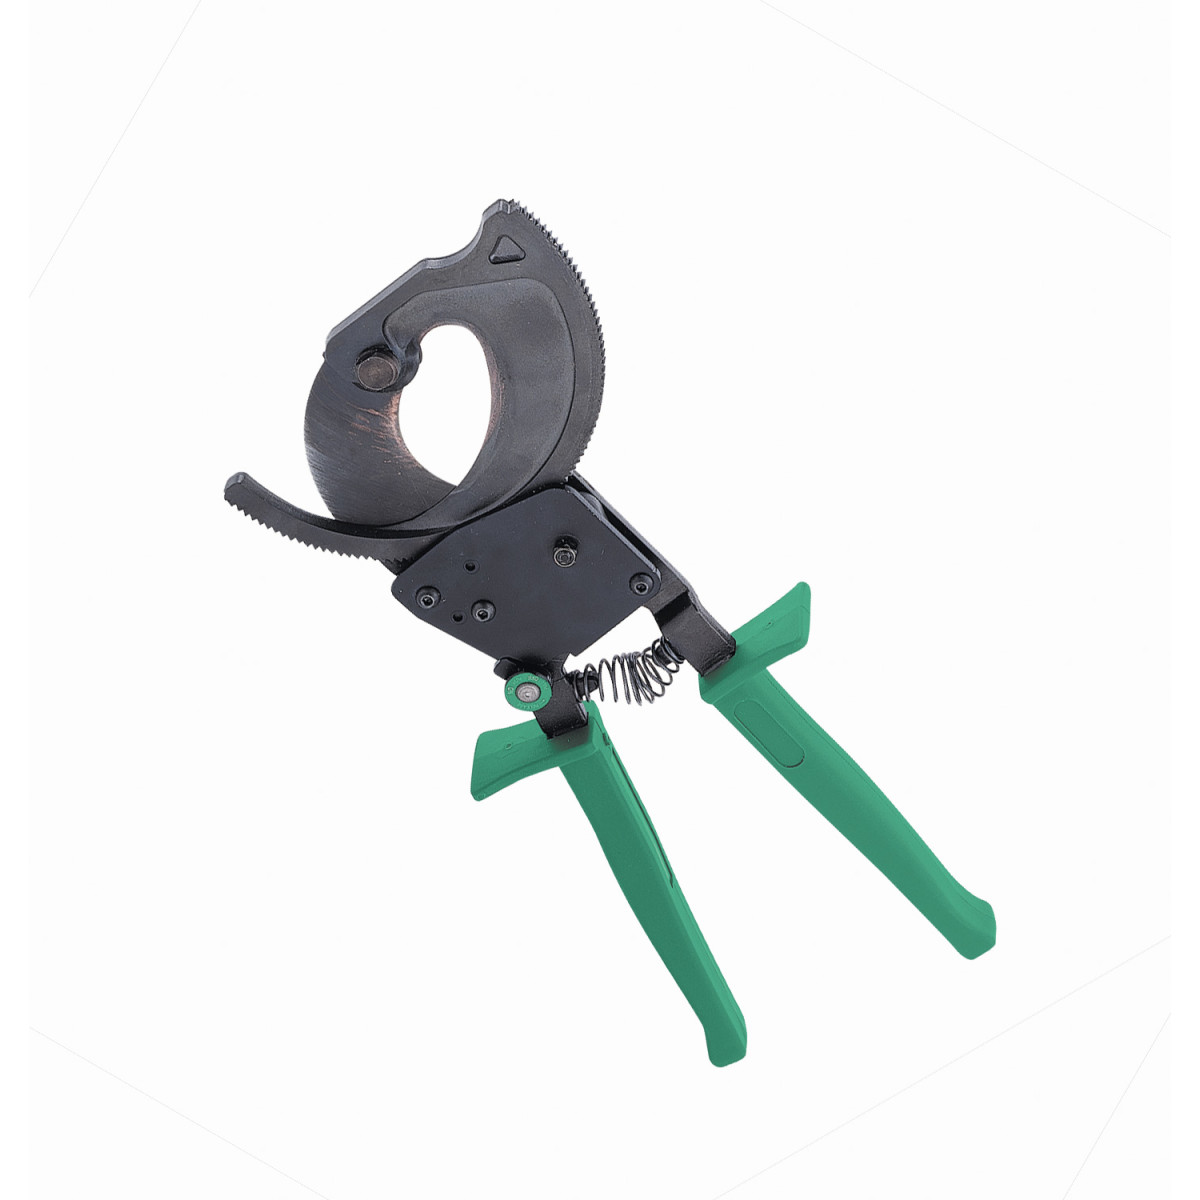 GREENLEE 760 CABLE CUTTER RATCHET